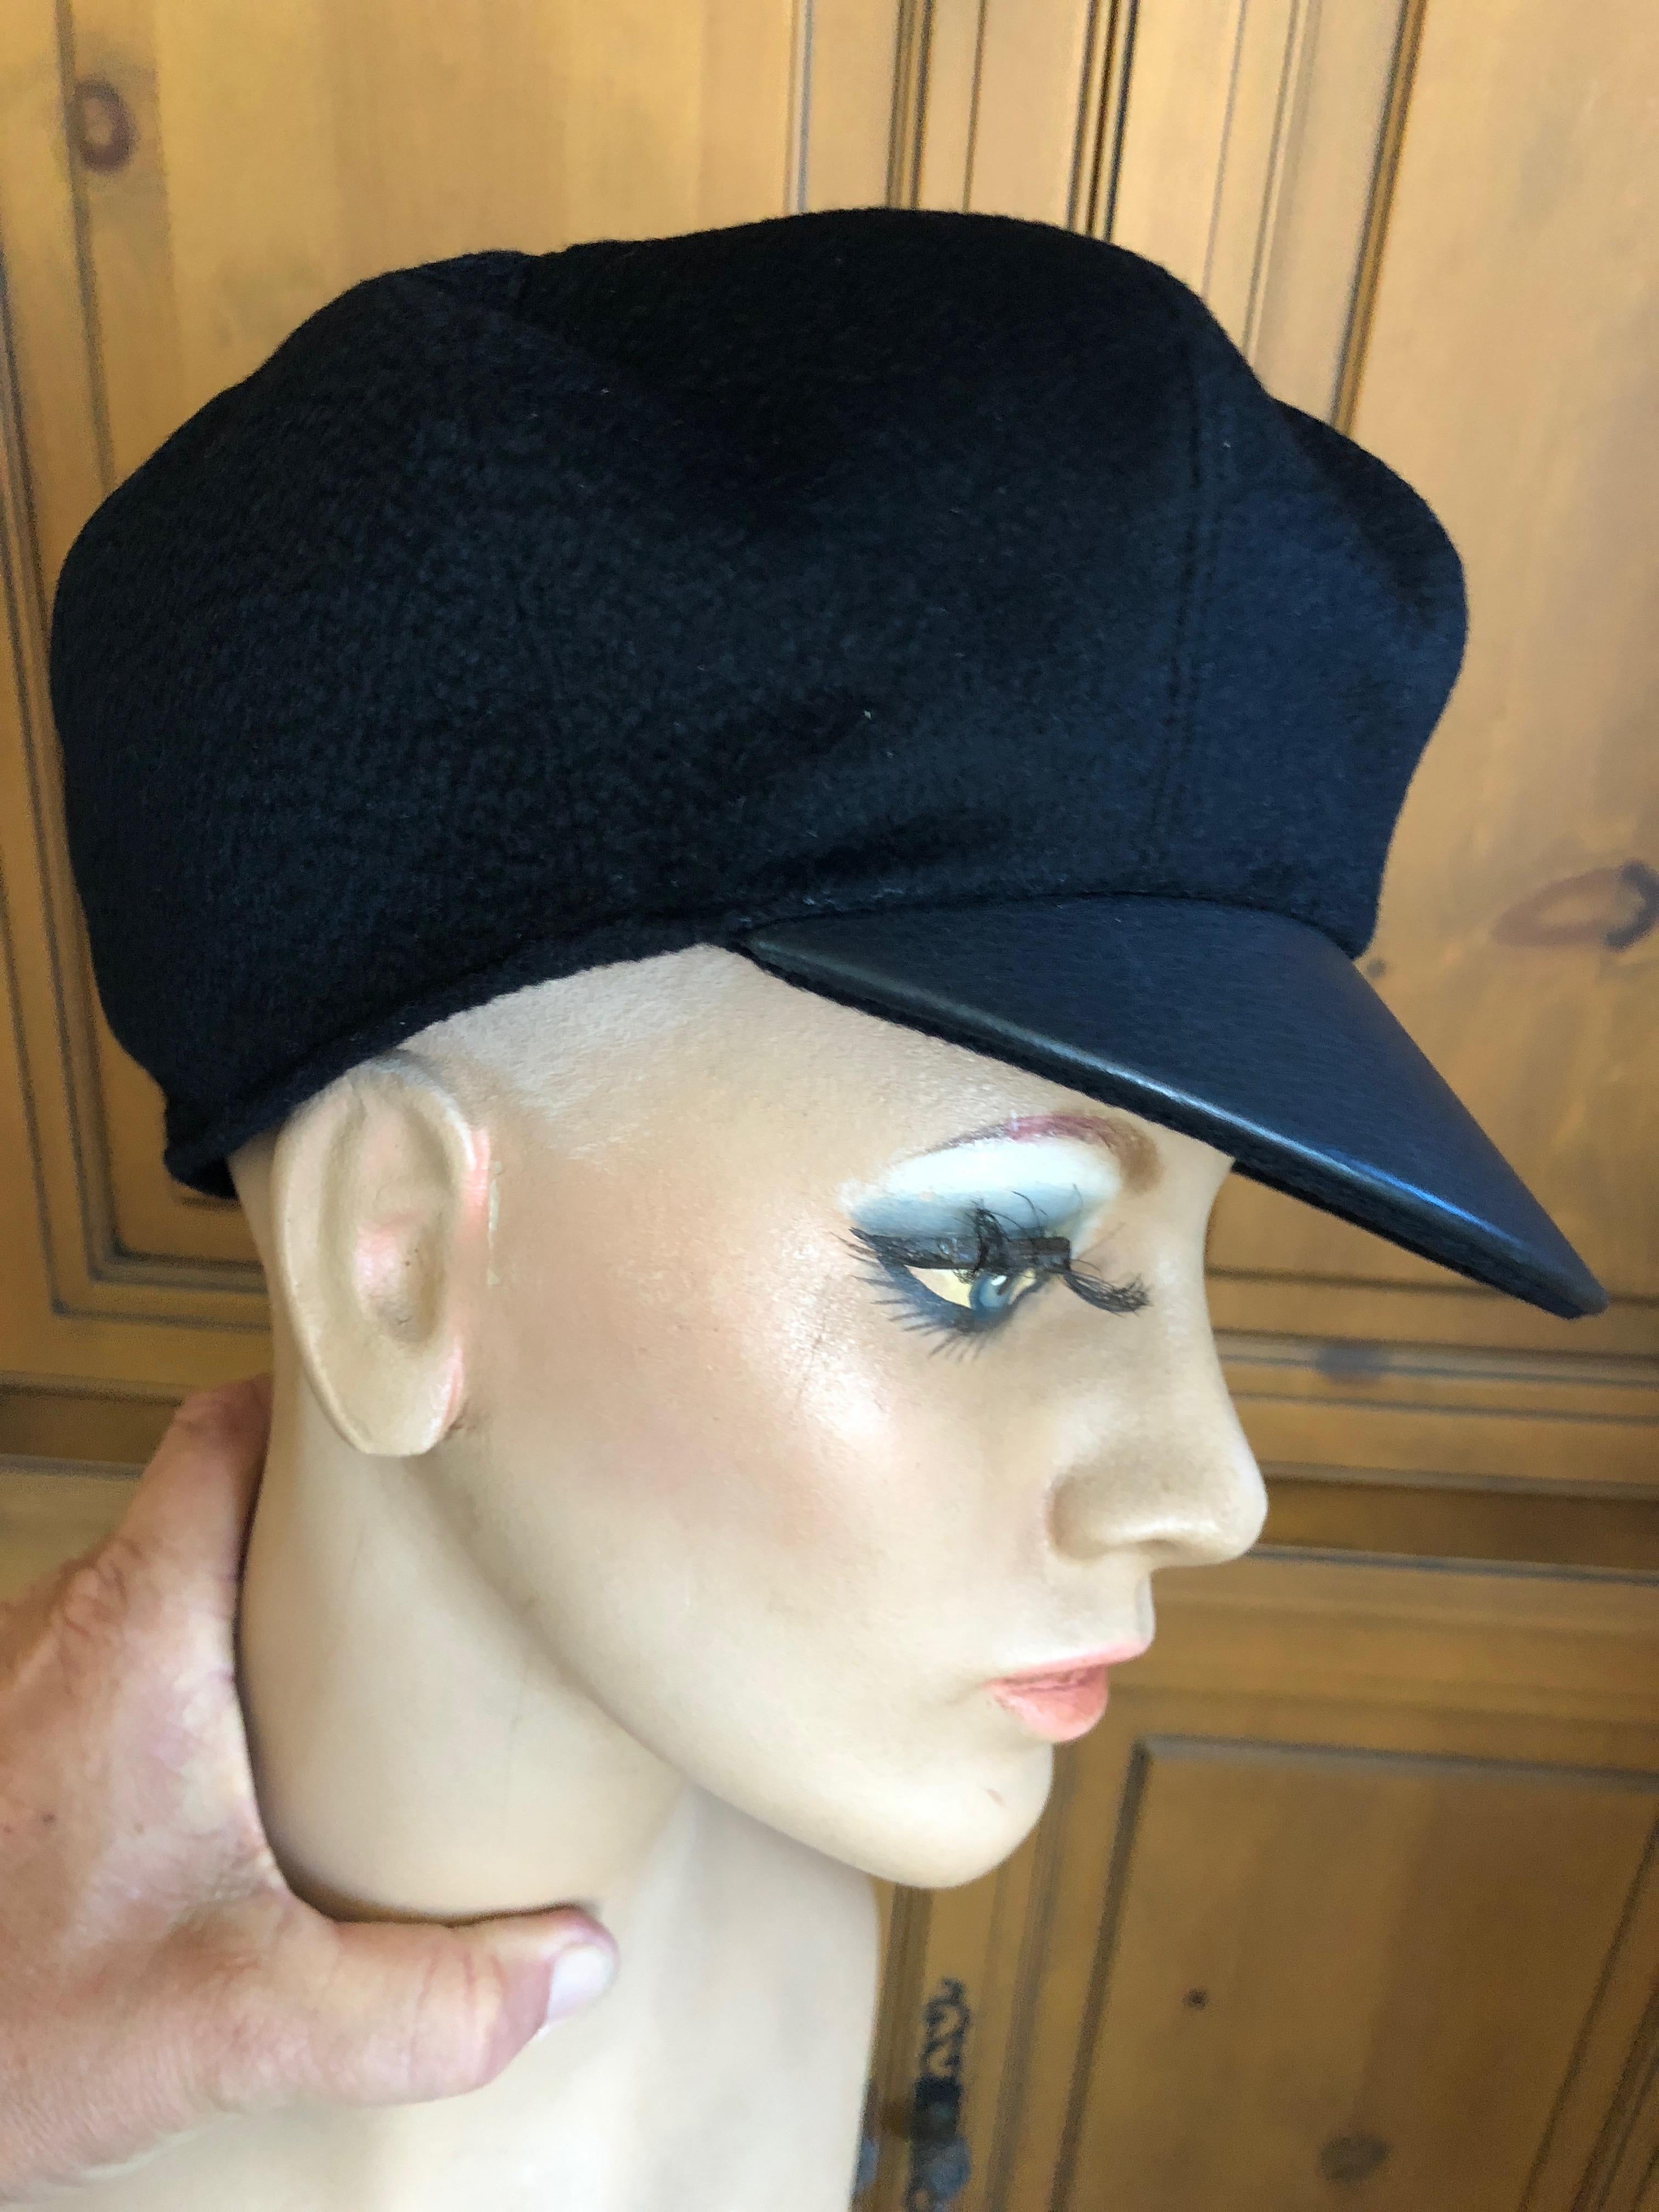 Hermes Black Pure Cashmere Newsboy Hat with Leather Visor 
This is a size 58 (cm) which would be Medium men's, Large Woman's